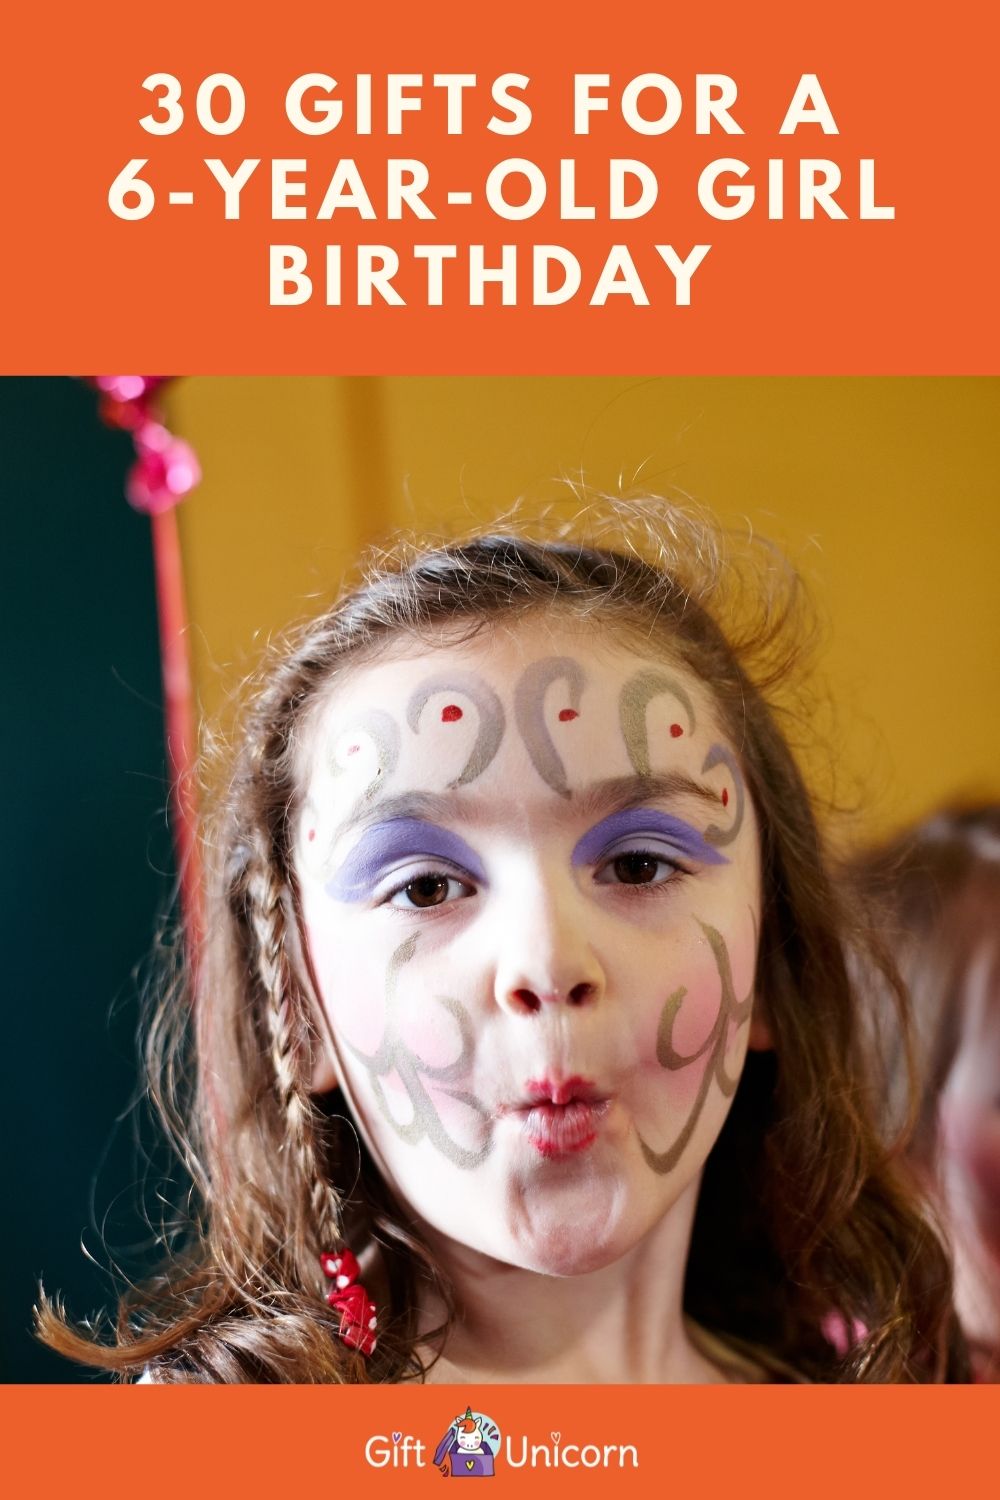 30 Fascinating Birthday Gift Ideas for 6-Year-Old Girl - pinterest pin image